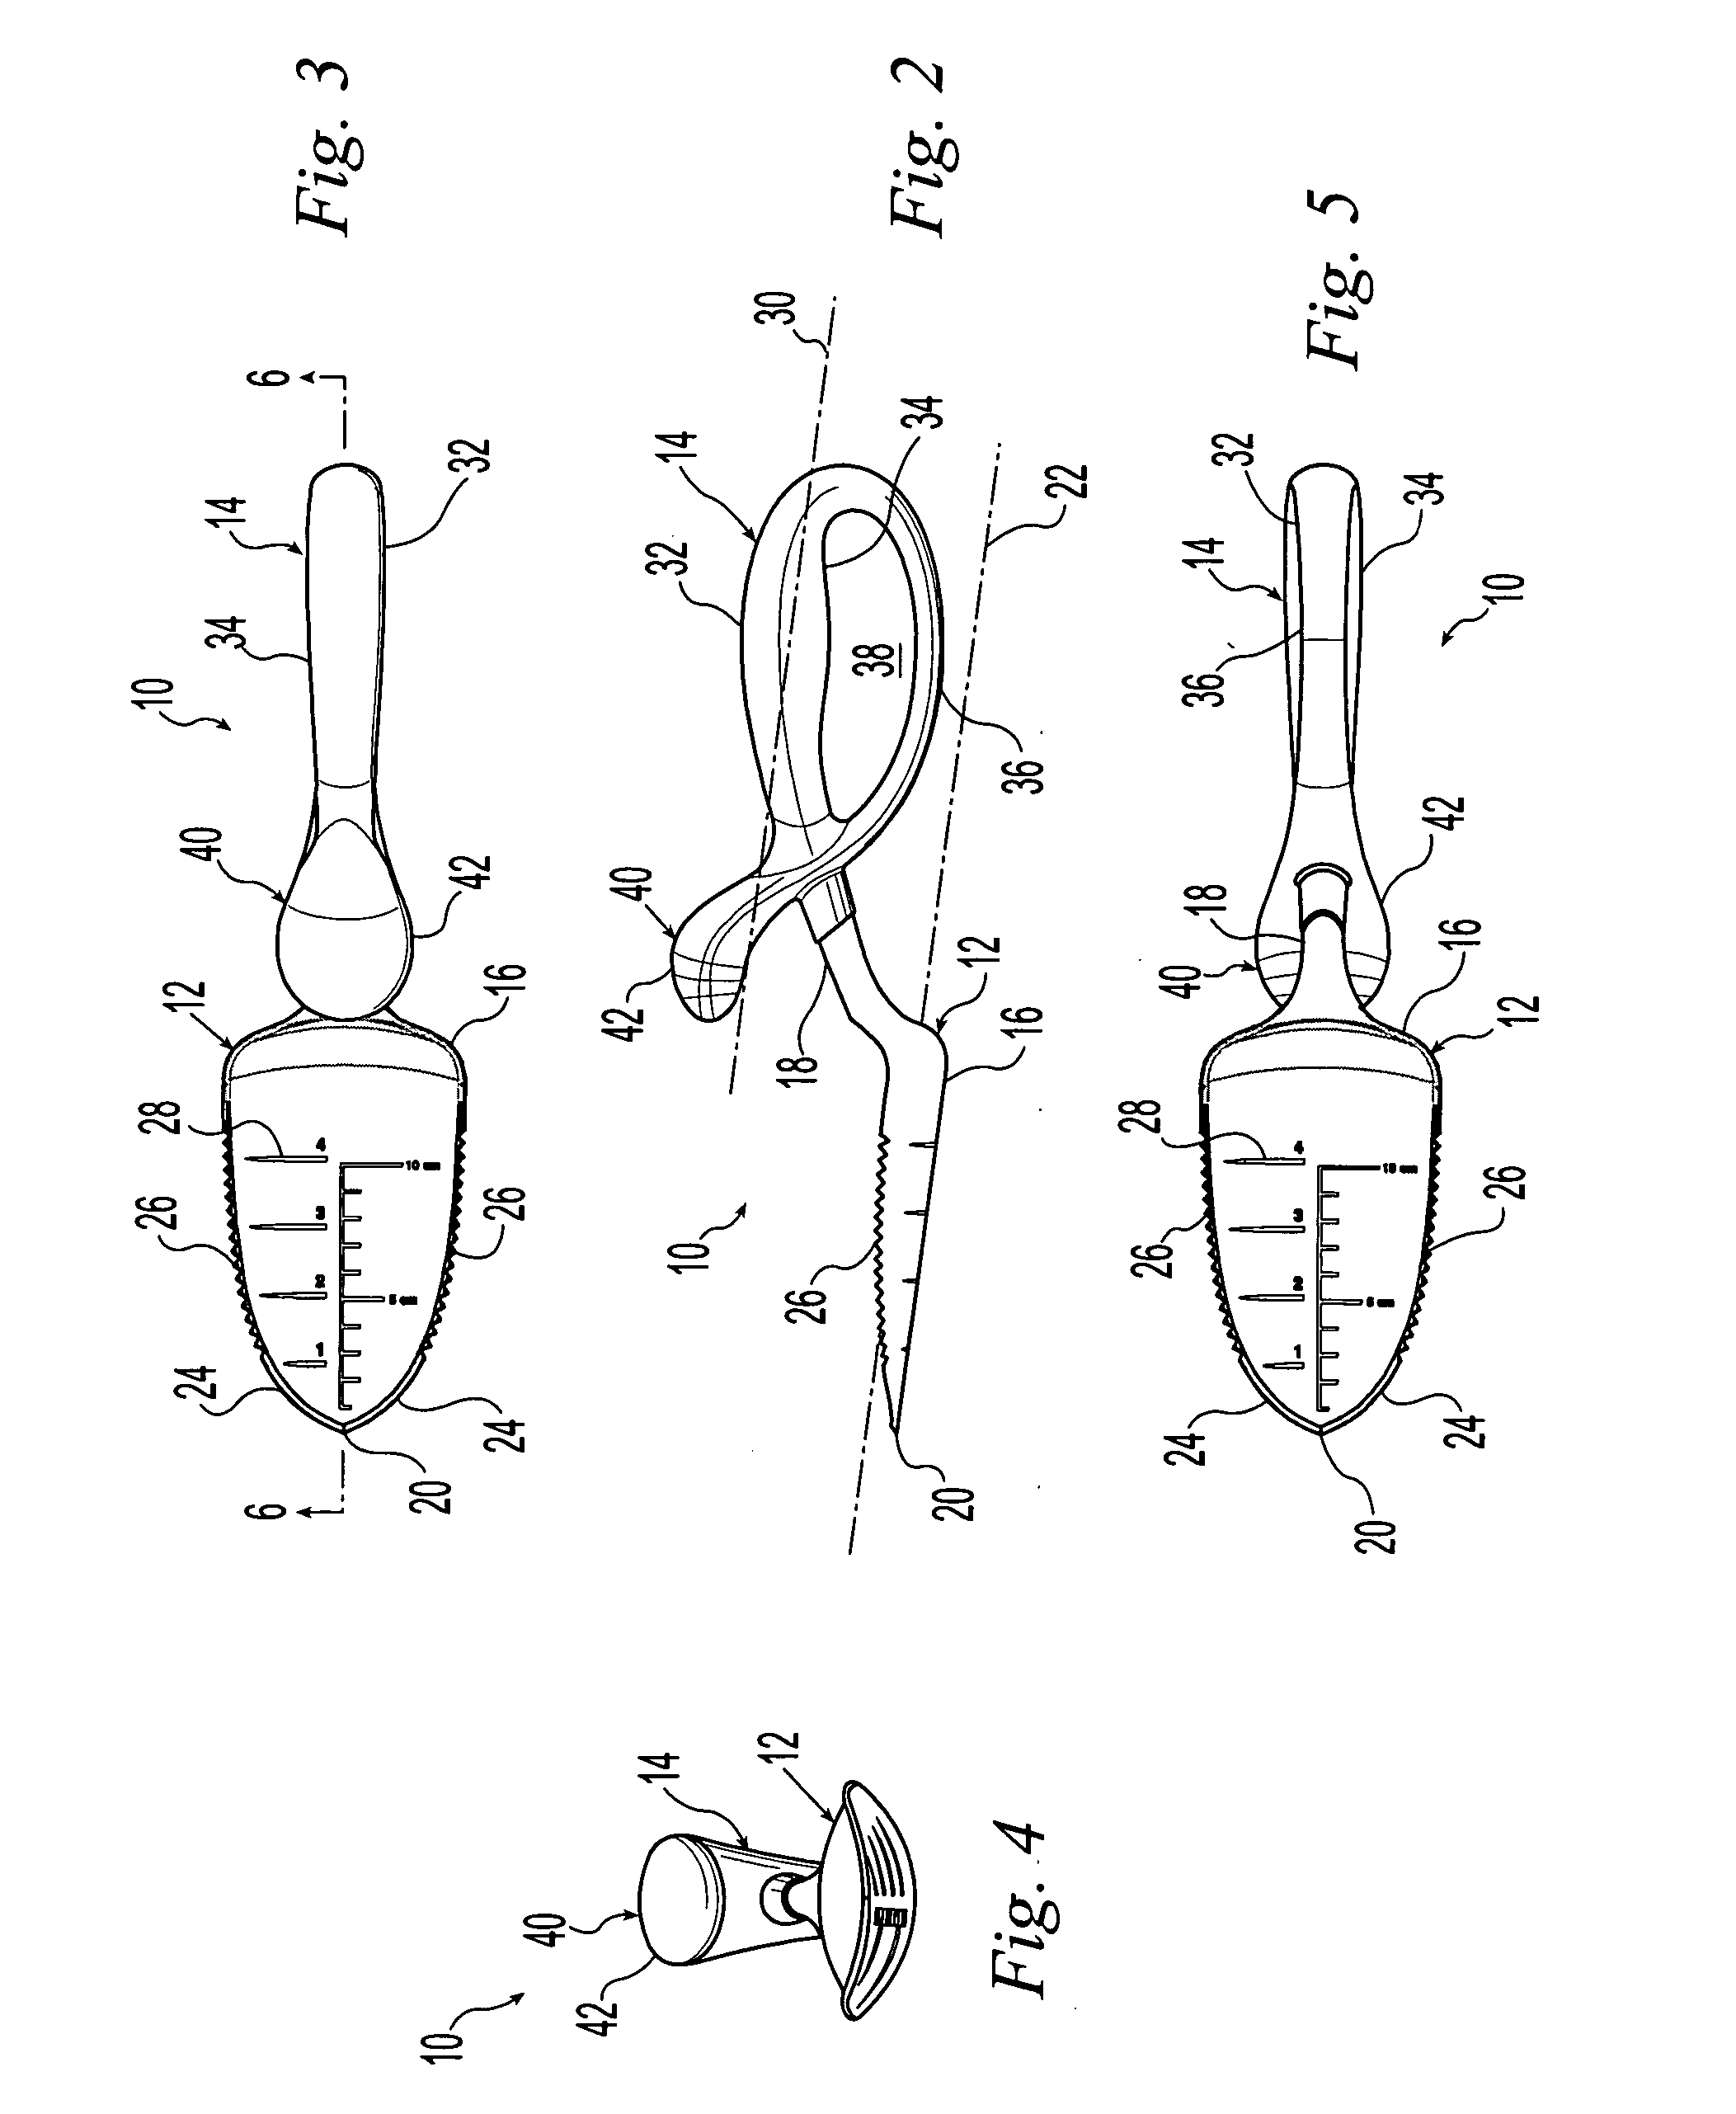 Hand tool with multiple grips